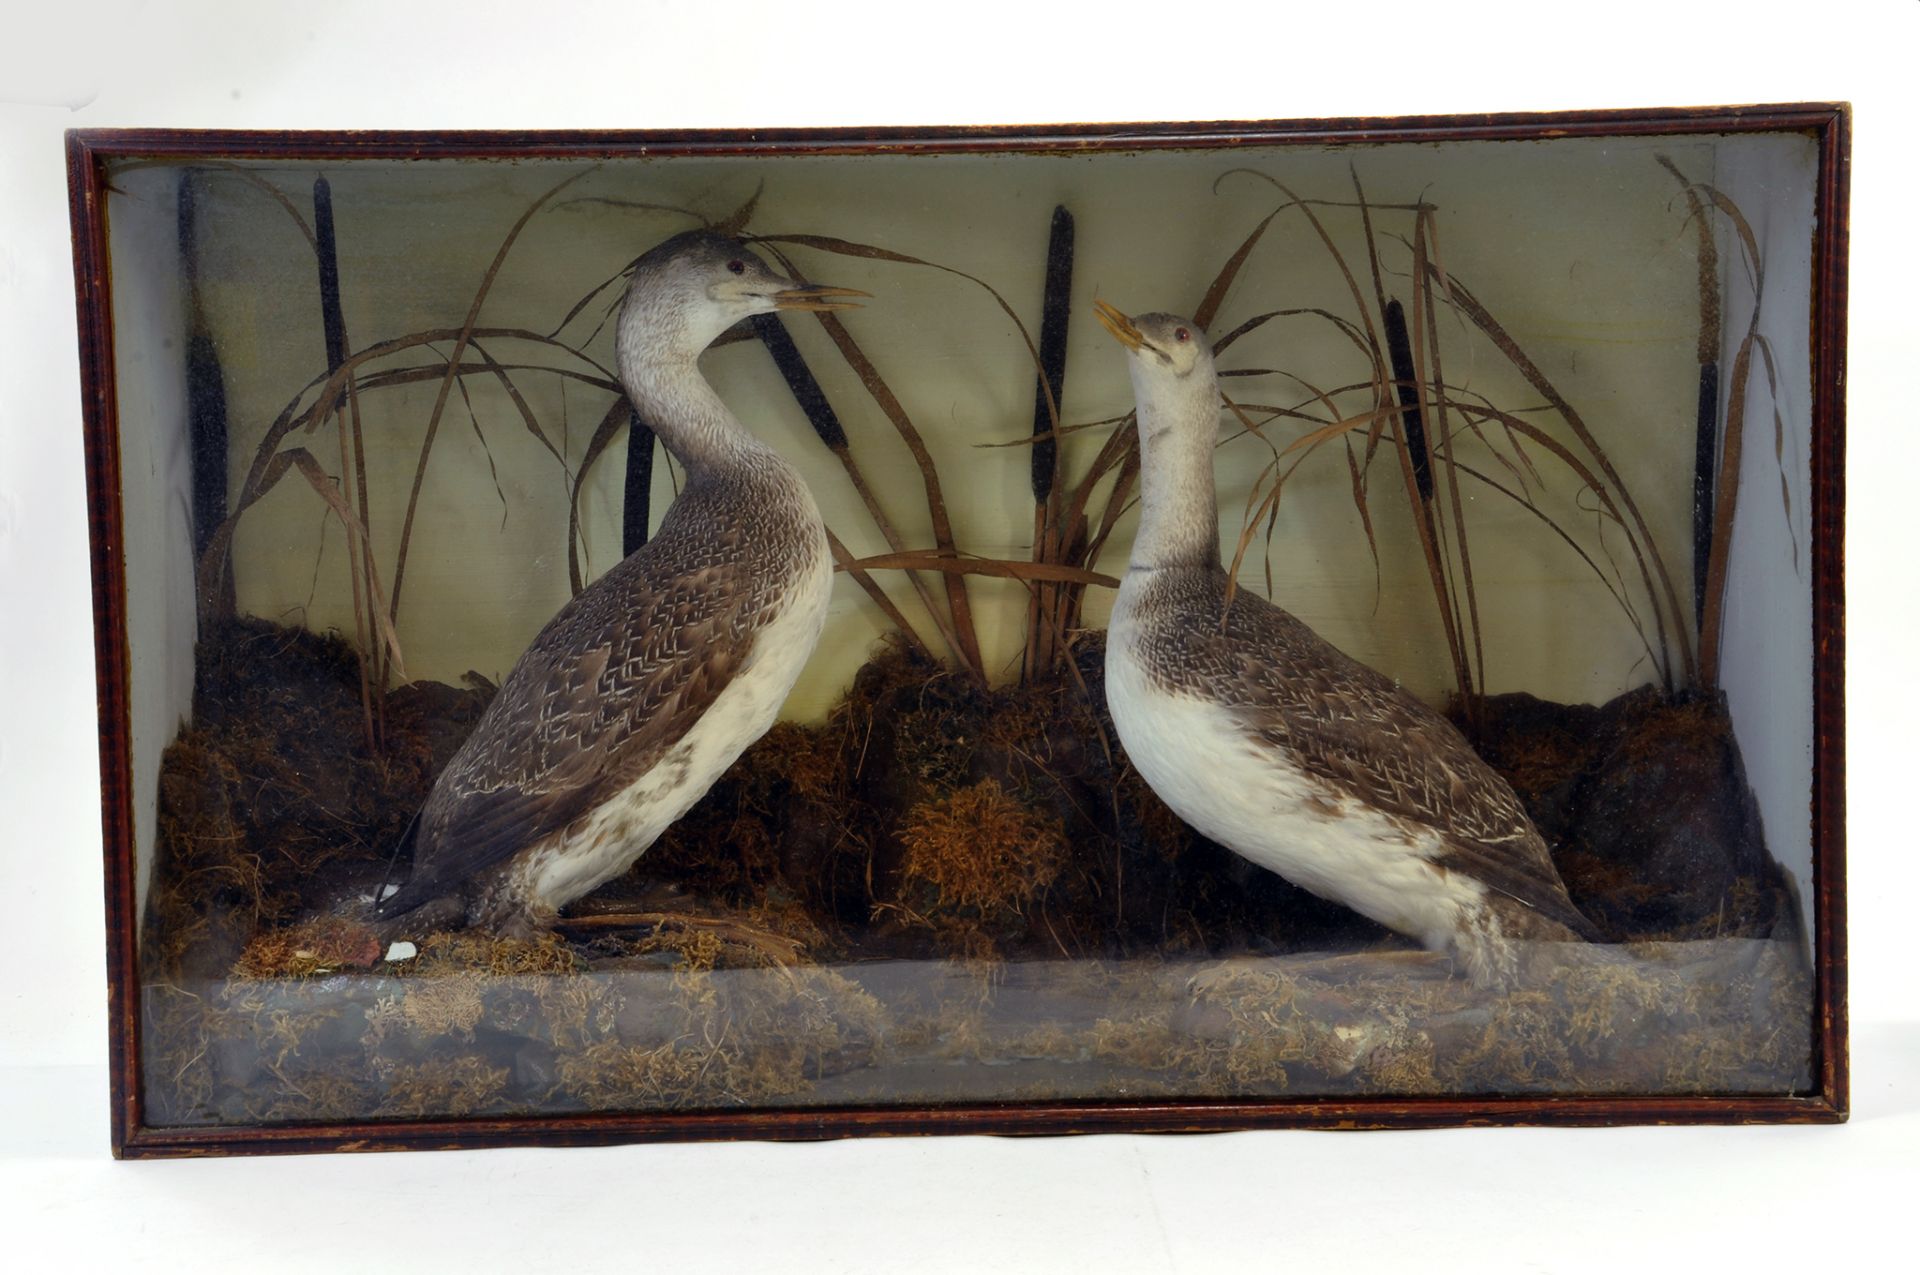 Taxidermy: An early 20th century impressive display of two coastal water birds in a large Wooden